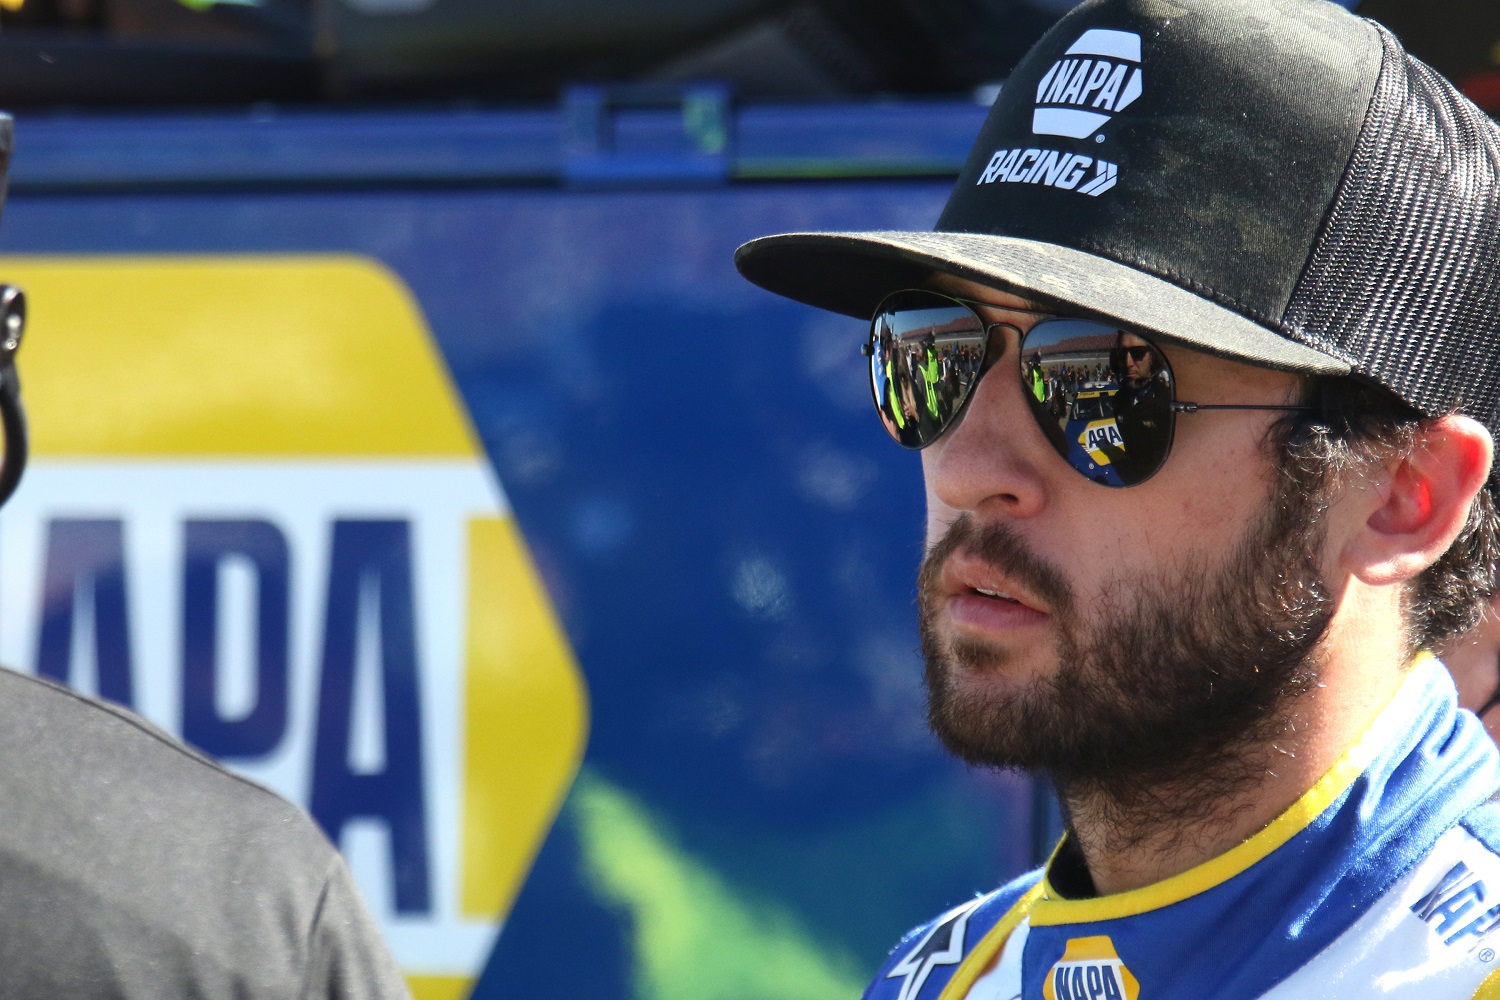 Chase Elliott talks with members of his crew during qualifying for the NASCAR PYellaWood 500 on Oct. 1, 2022 at Talladega Superspeedway. | Jeff Robinson/Icon Sportswire via Getty Images